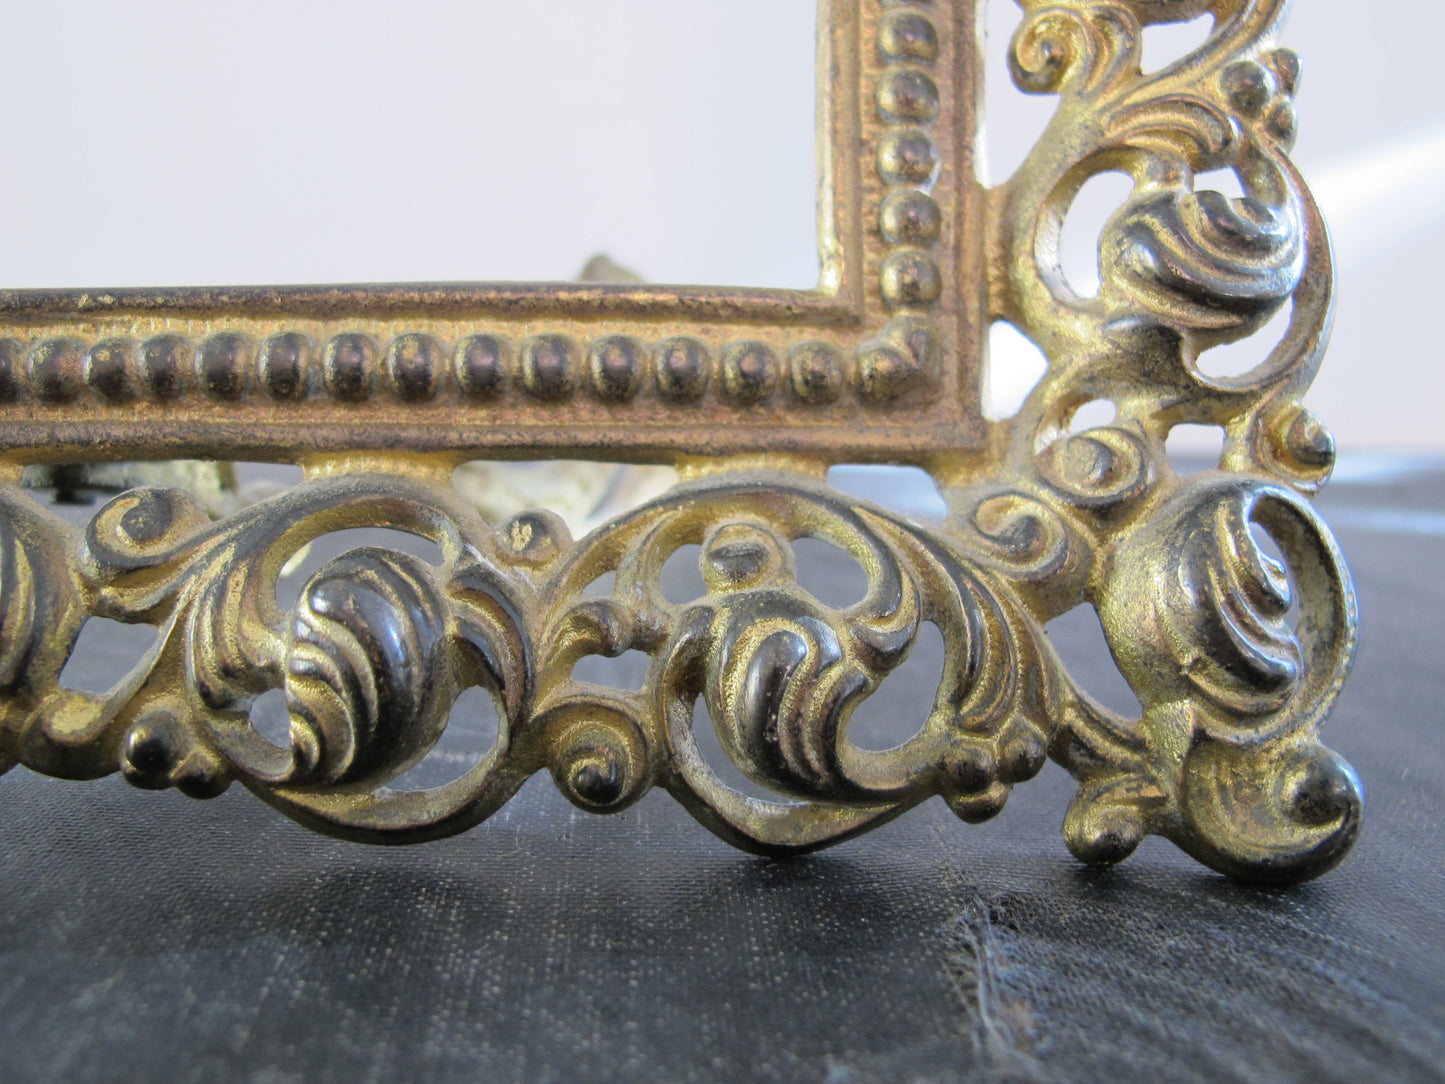 Frame Victorian Gilded Cast Iron Openwork Rococo Revival c. 1880 Original Surface Very Fine Casting